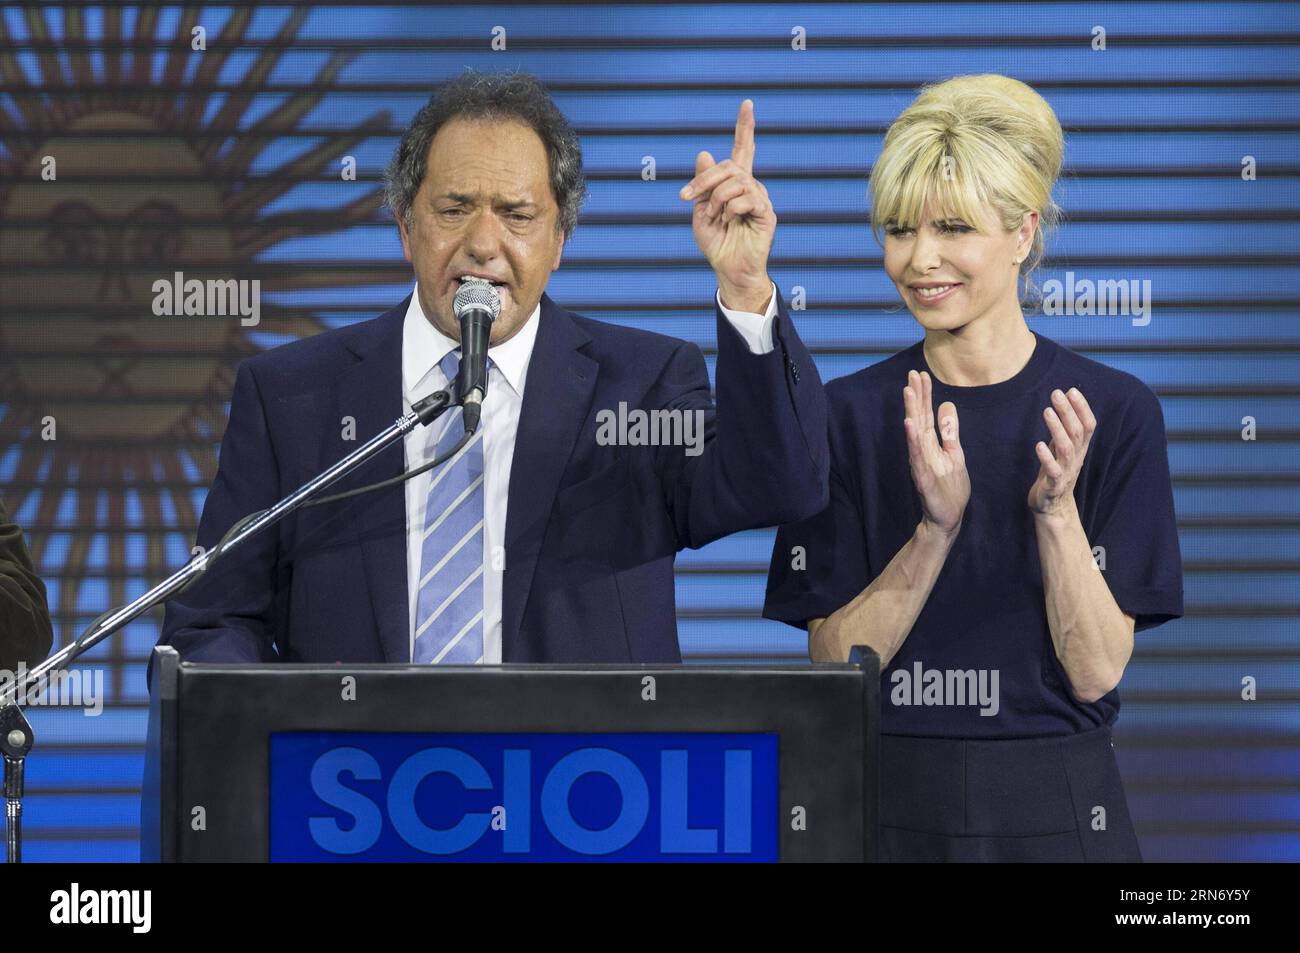 (150810) -- BUENOS AIRES, Aug. 10, 2015 -- The presidential candidate to Argentina s Presidency of ruling party Frente para la Victoria (Front for Victory), Daniel Scioli (L), speaks along with his wife Karina Rabolini (R), at the campaign bunker, in Buenos Aires city, Argentina, early Aug 10, 2015. Scioli received most votes in the national primary elections in Buenos Aires on Sunday, ahead the general elections to be held on October 25th. Argentines voted Sunday in presidential primaries seen as an early indicator of who is best positioned to succeed President Cristina Kirchner. ) ARGENTINA- Stock Photo